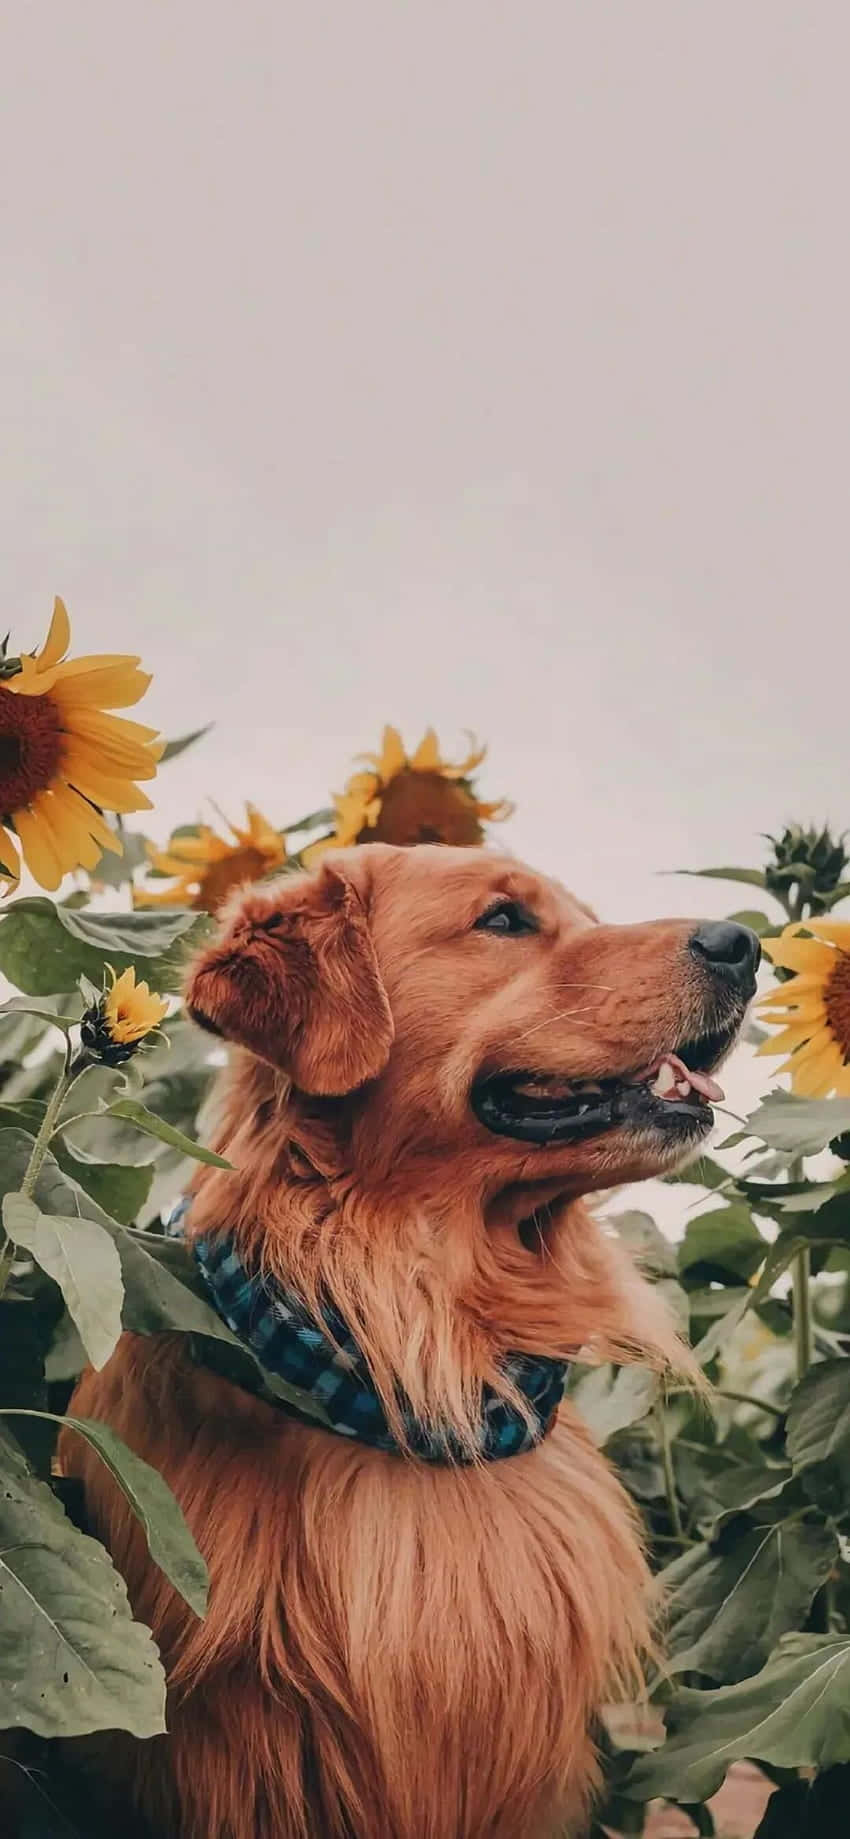 Enjoy the beauty of summer with this stunning sunflower aesthetic iPhone wallpaper Wallpaper